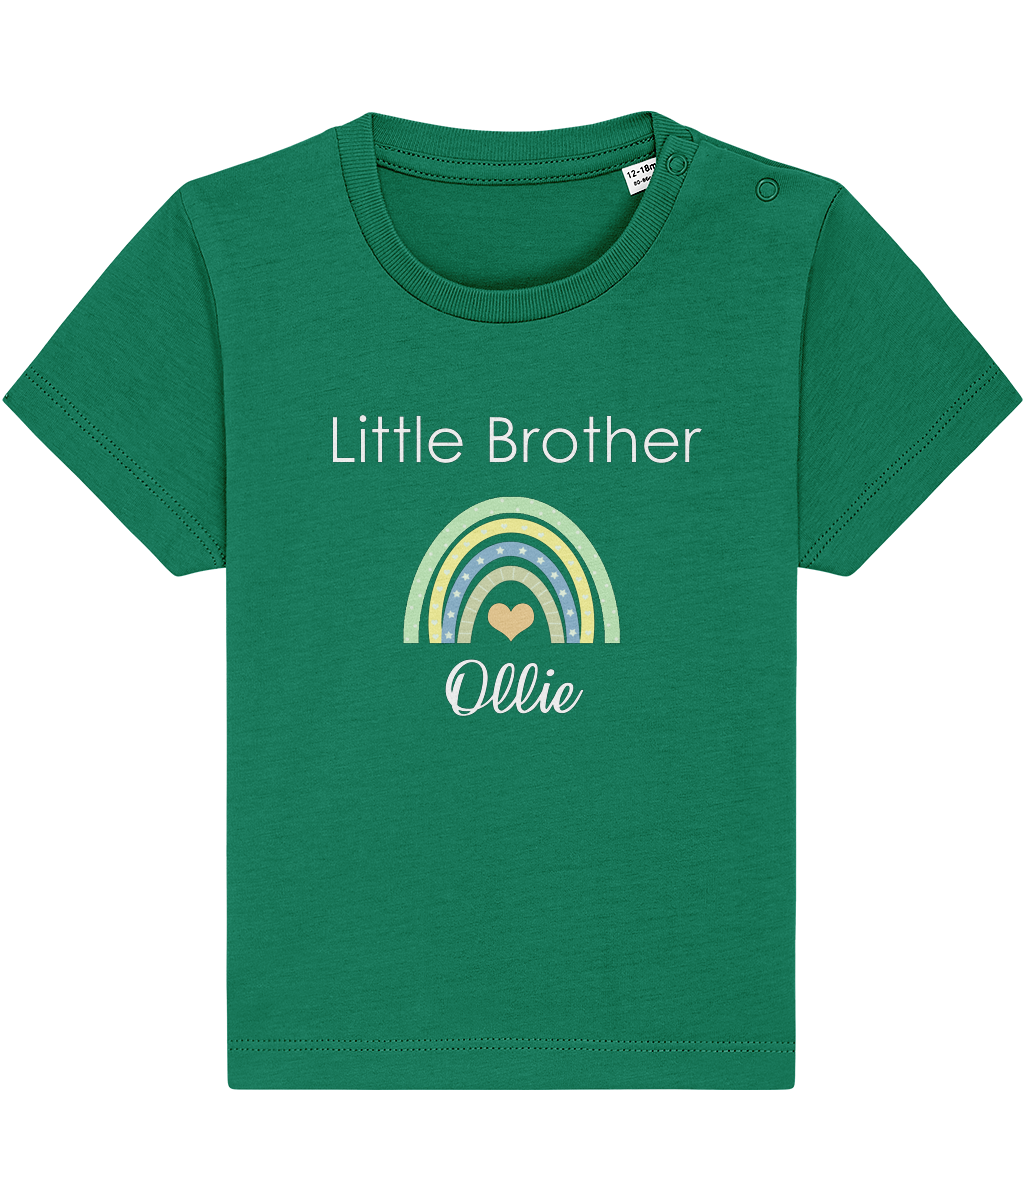 Little Brother T-Shirt (small sizes)